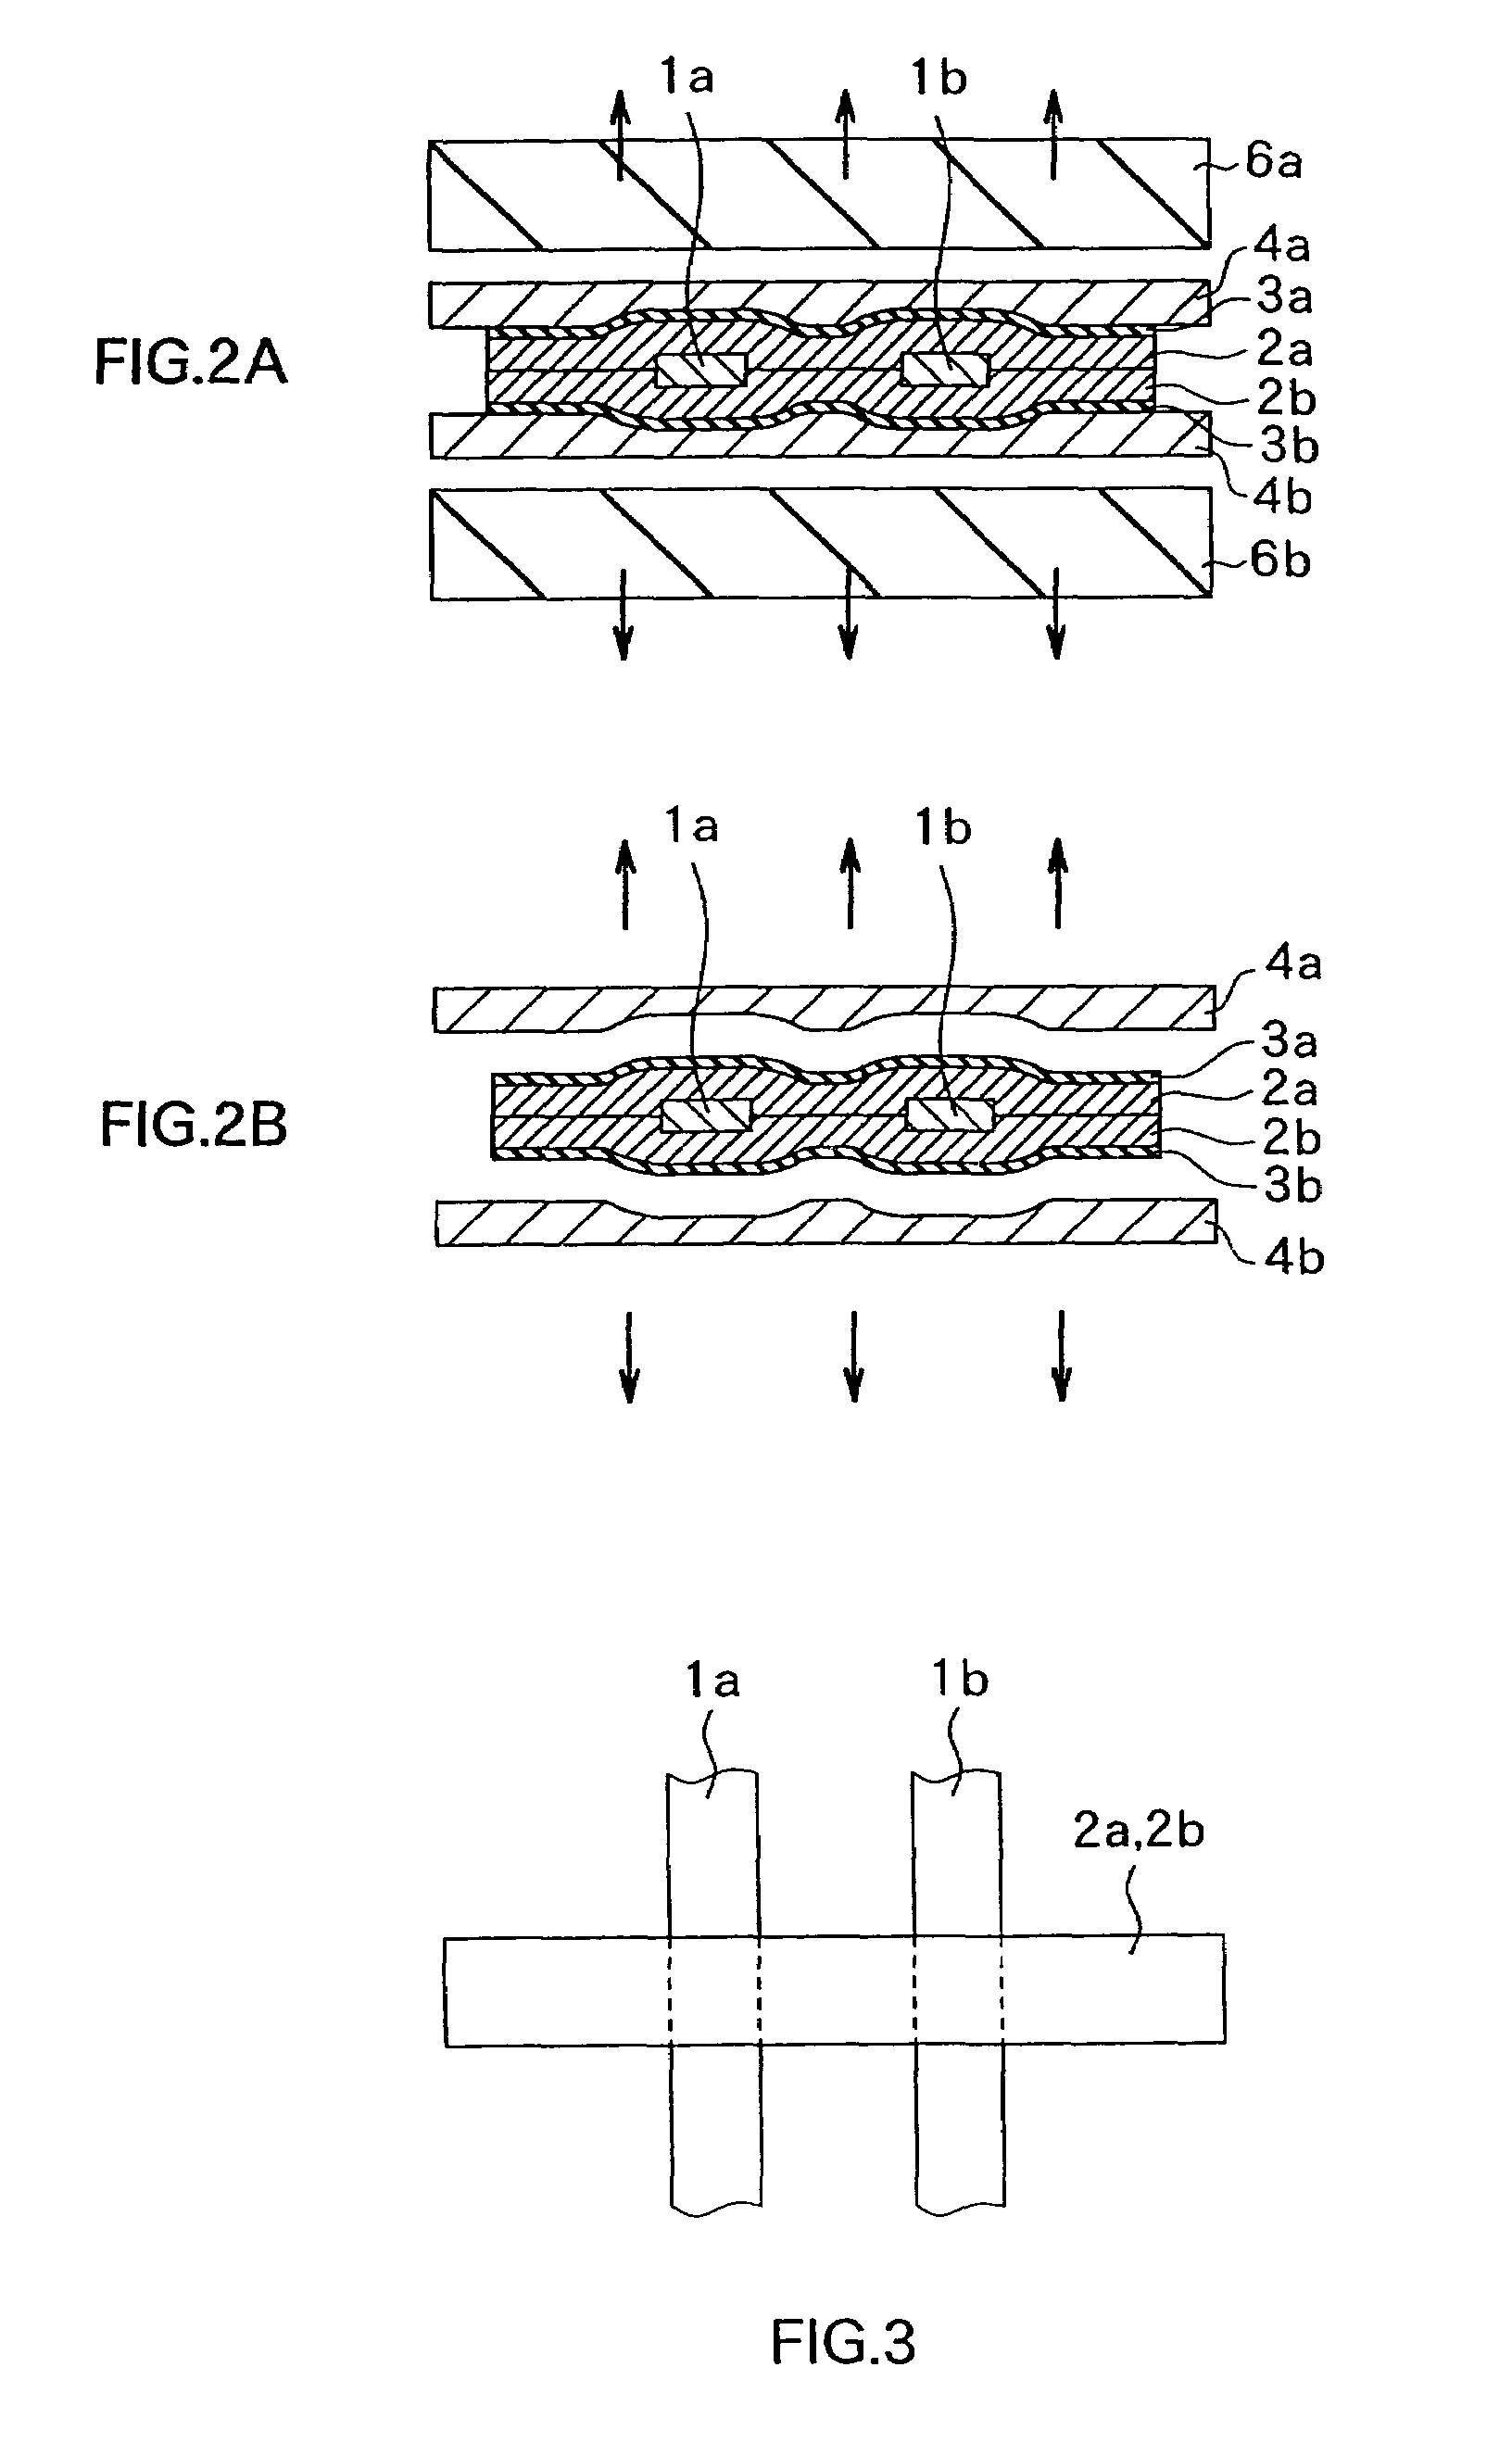 Nonaqueous-electrolyte secondary battery and method of manufacturing the same